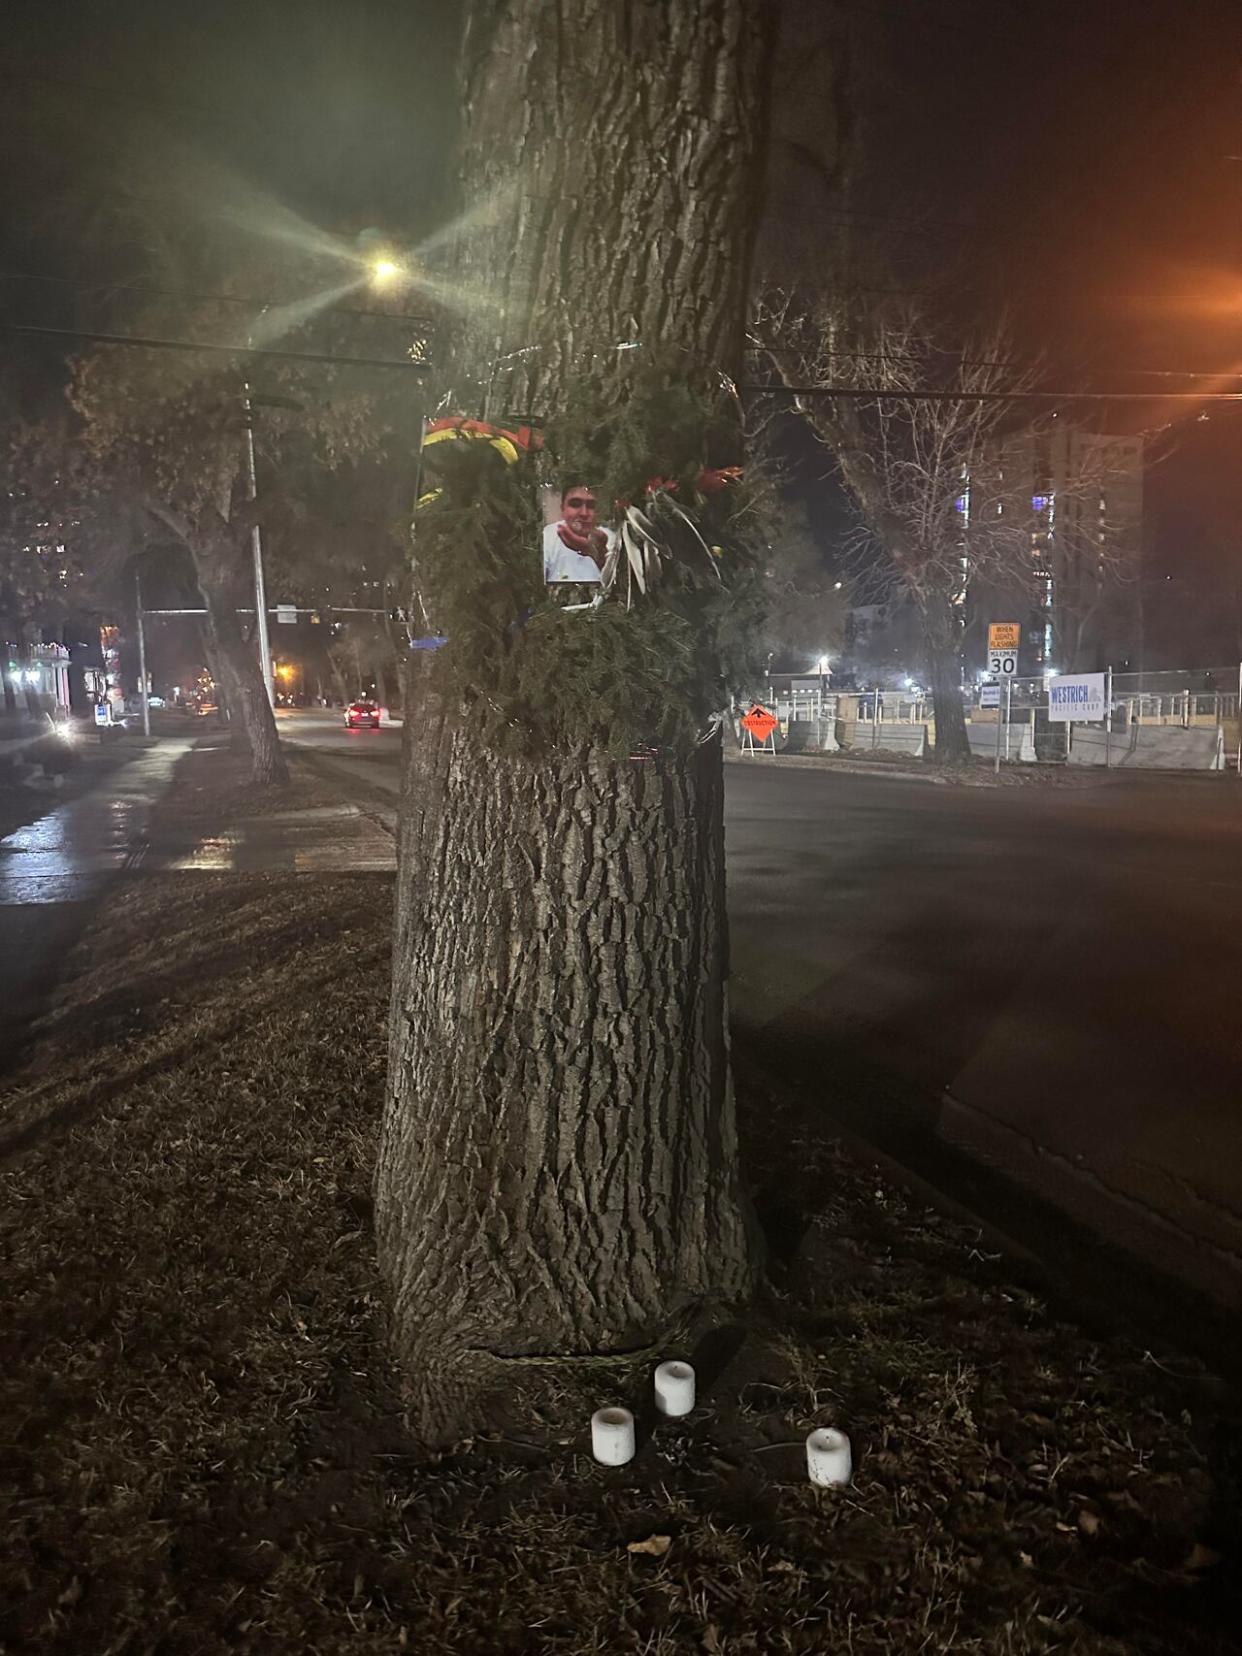 A memorial has been set up in Edmonton's Oliver neighbourhood, at the site where a man was killed Sunday in an altercation with police. (Paige Parsons/CBC - image credit)